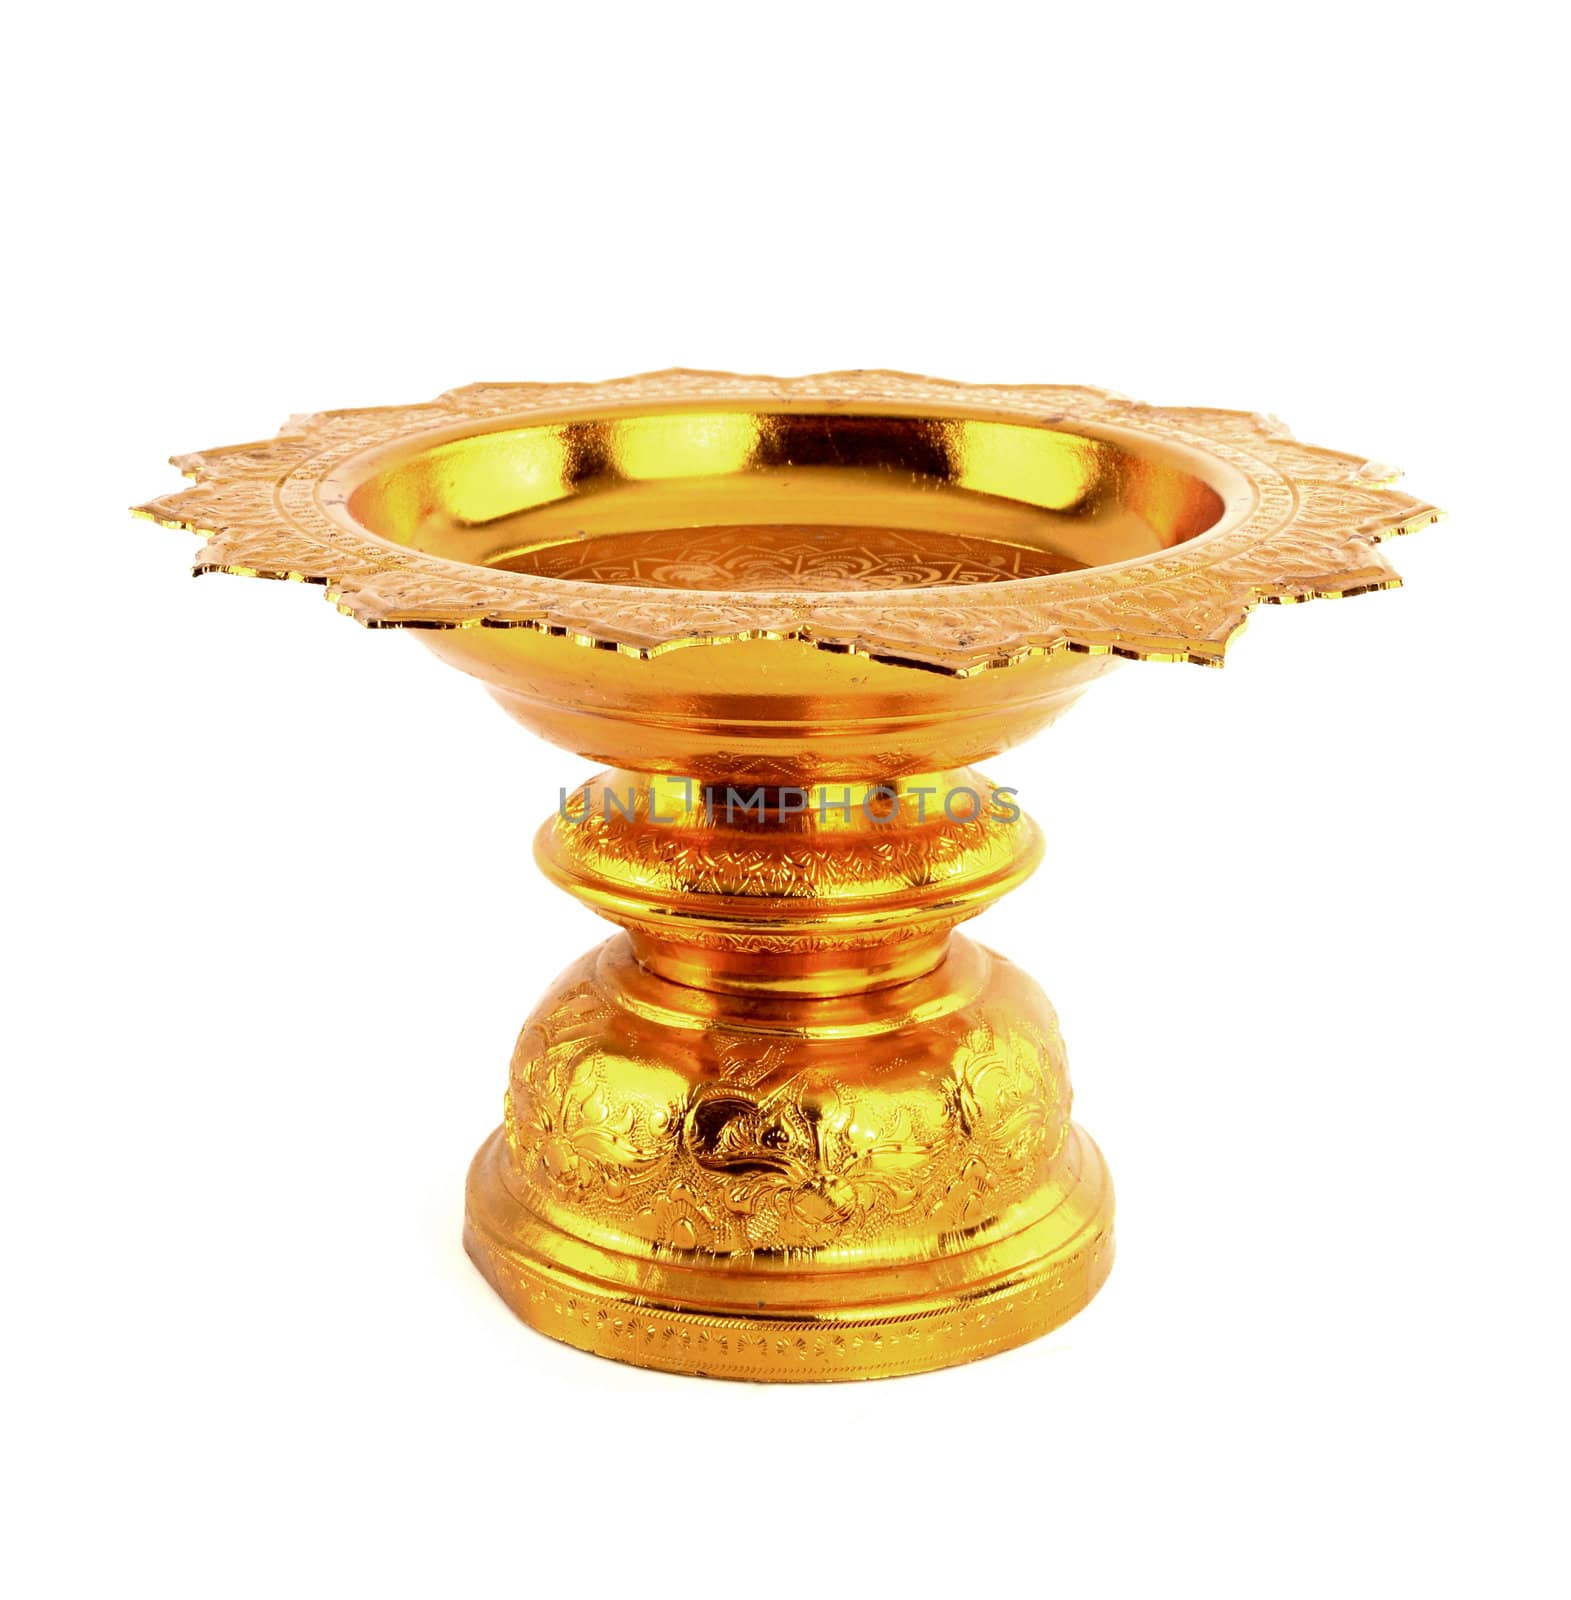 golden tray with pedestal upside down in isolated white backgrou by geargodz